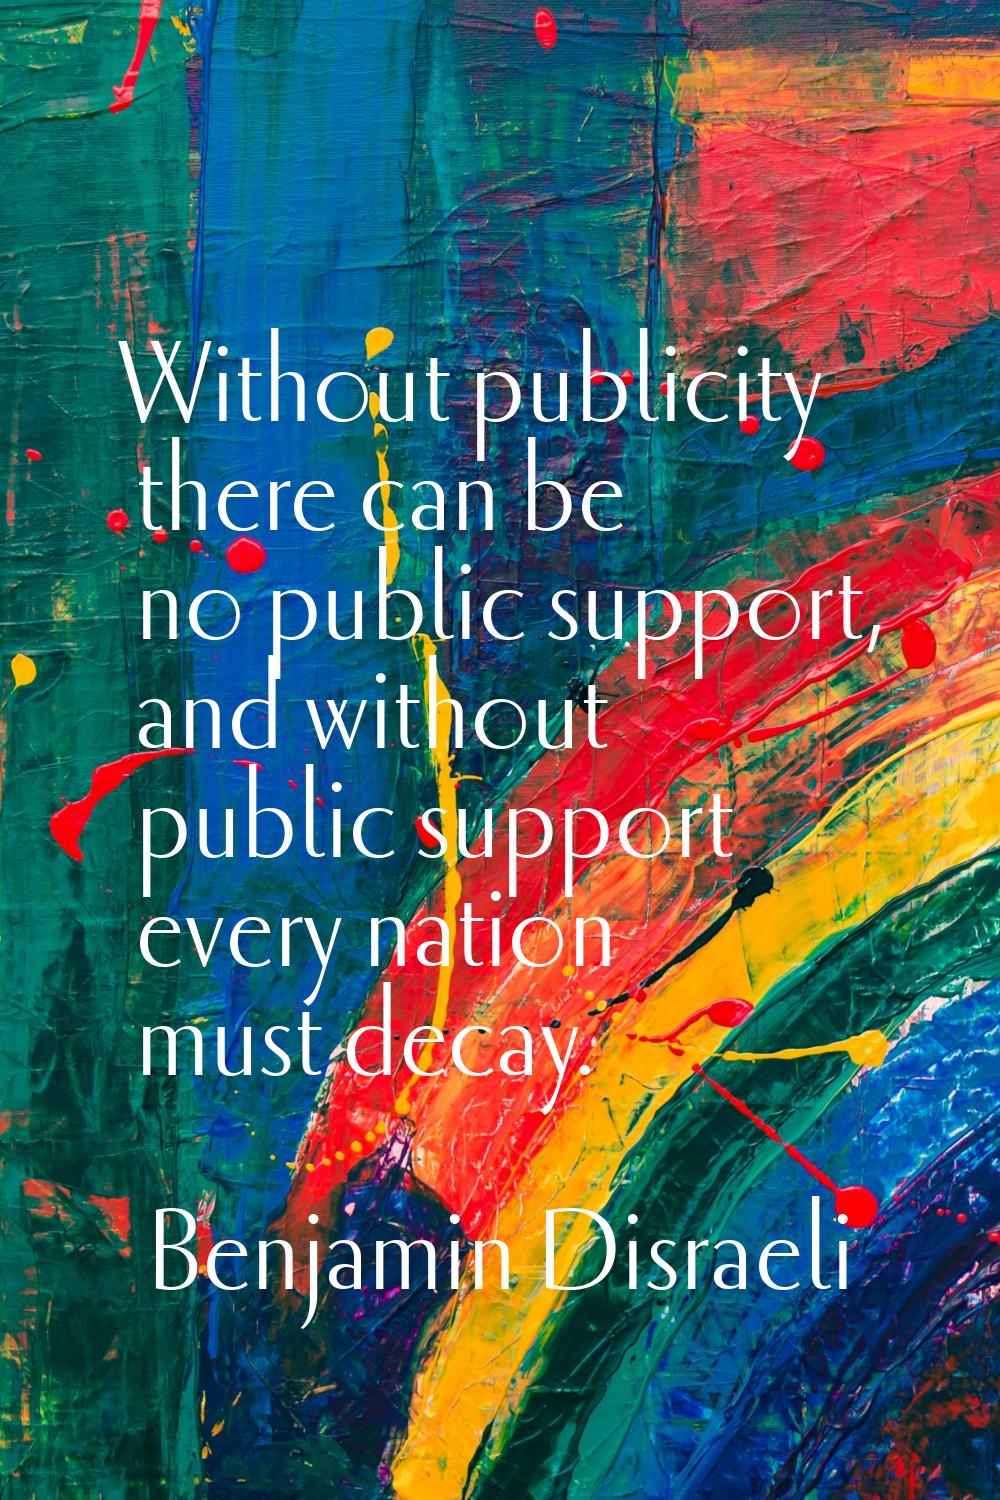 Without publicity there can be no public support, and without public support every nation must deca